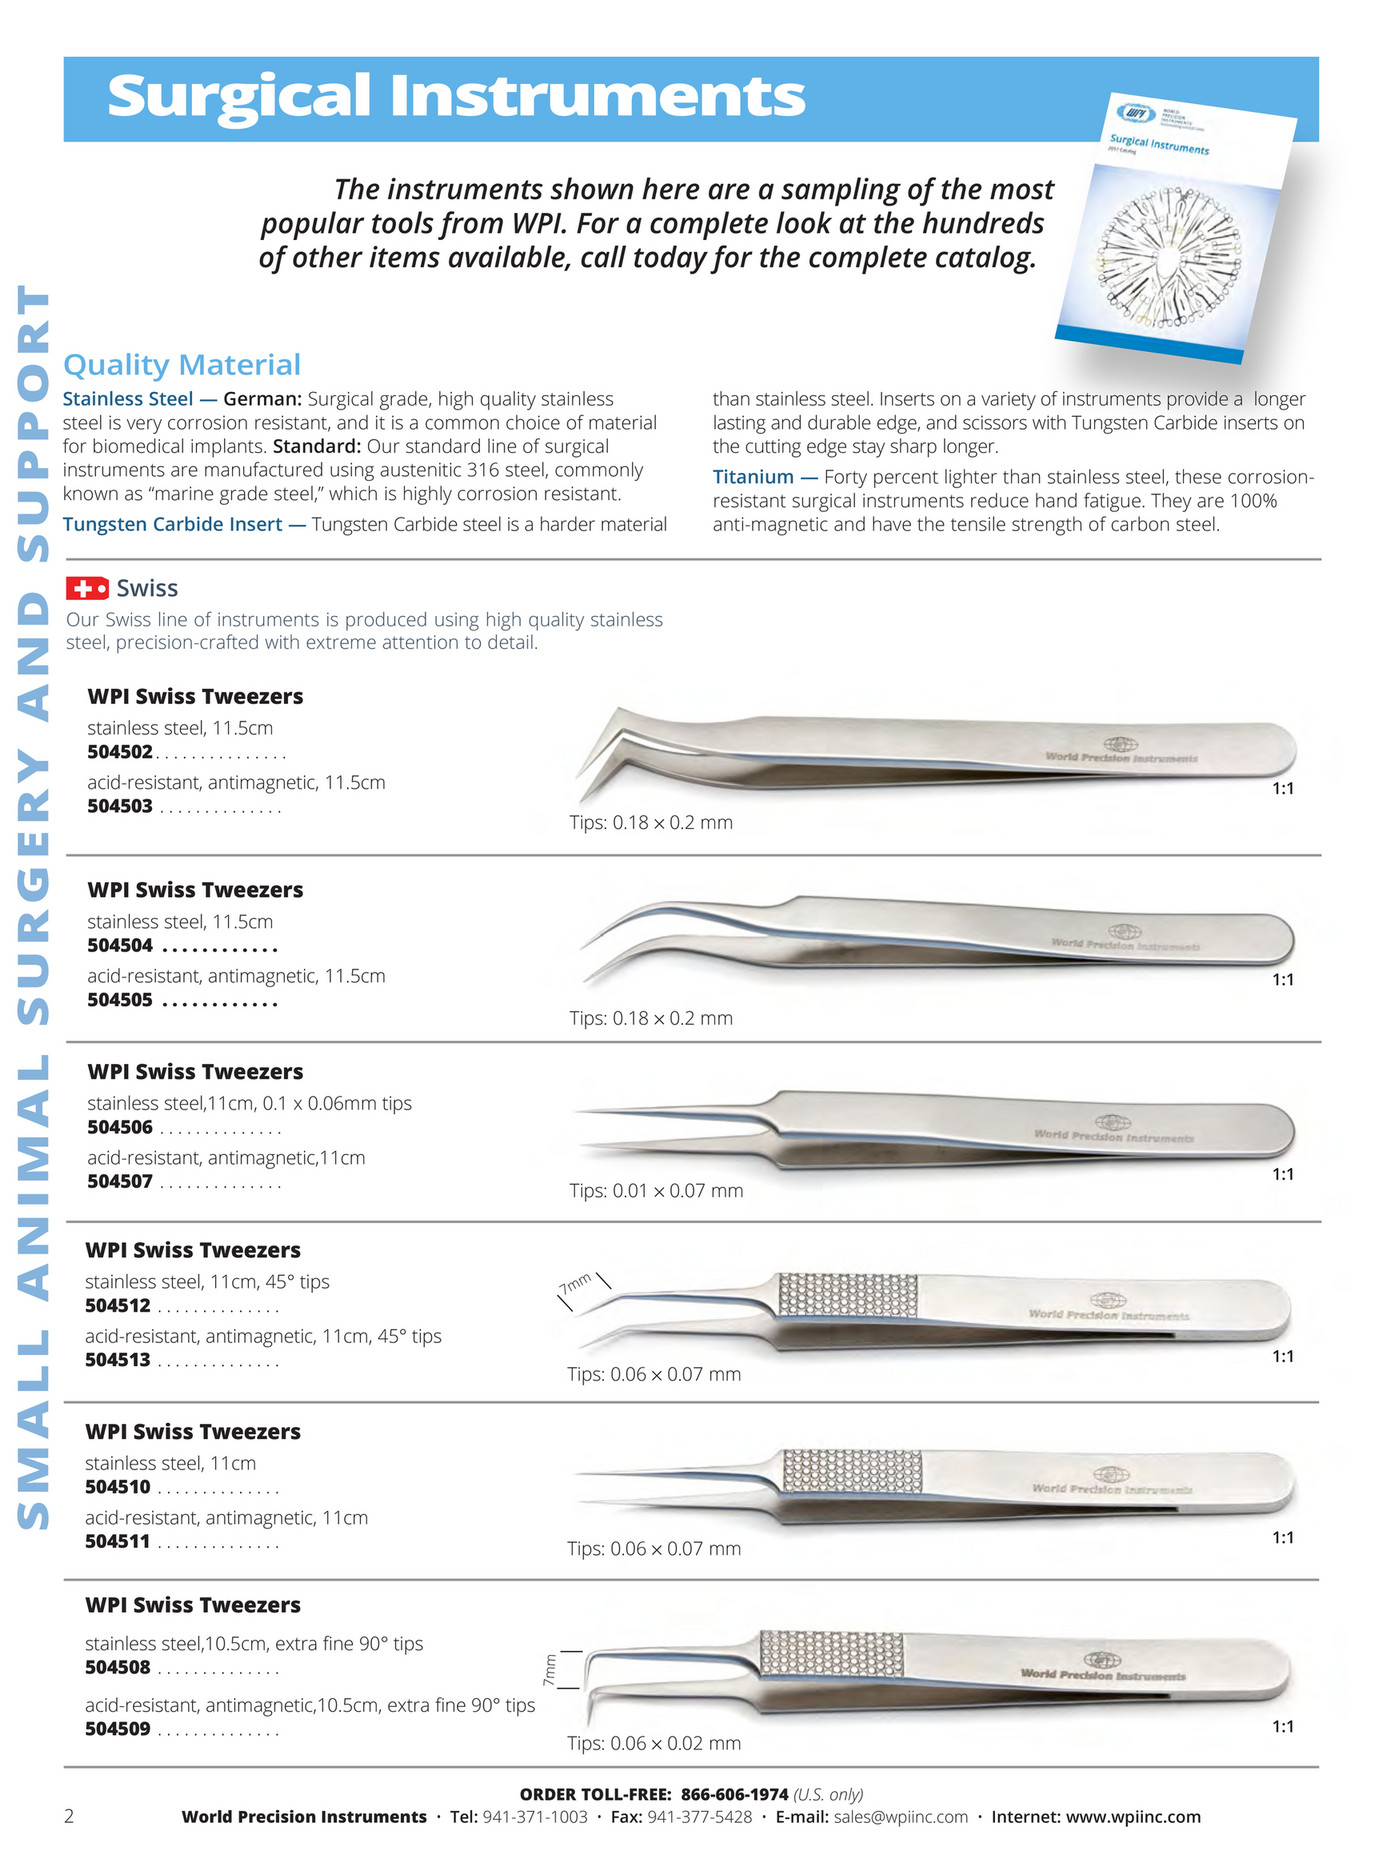 World Precision Instruments - 2016-Small Animal Surgery Catalog - Page 4-5